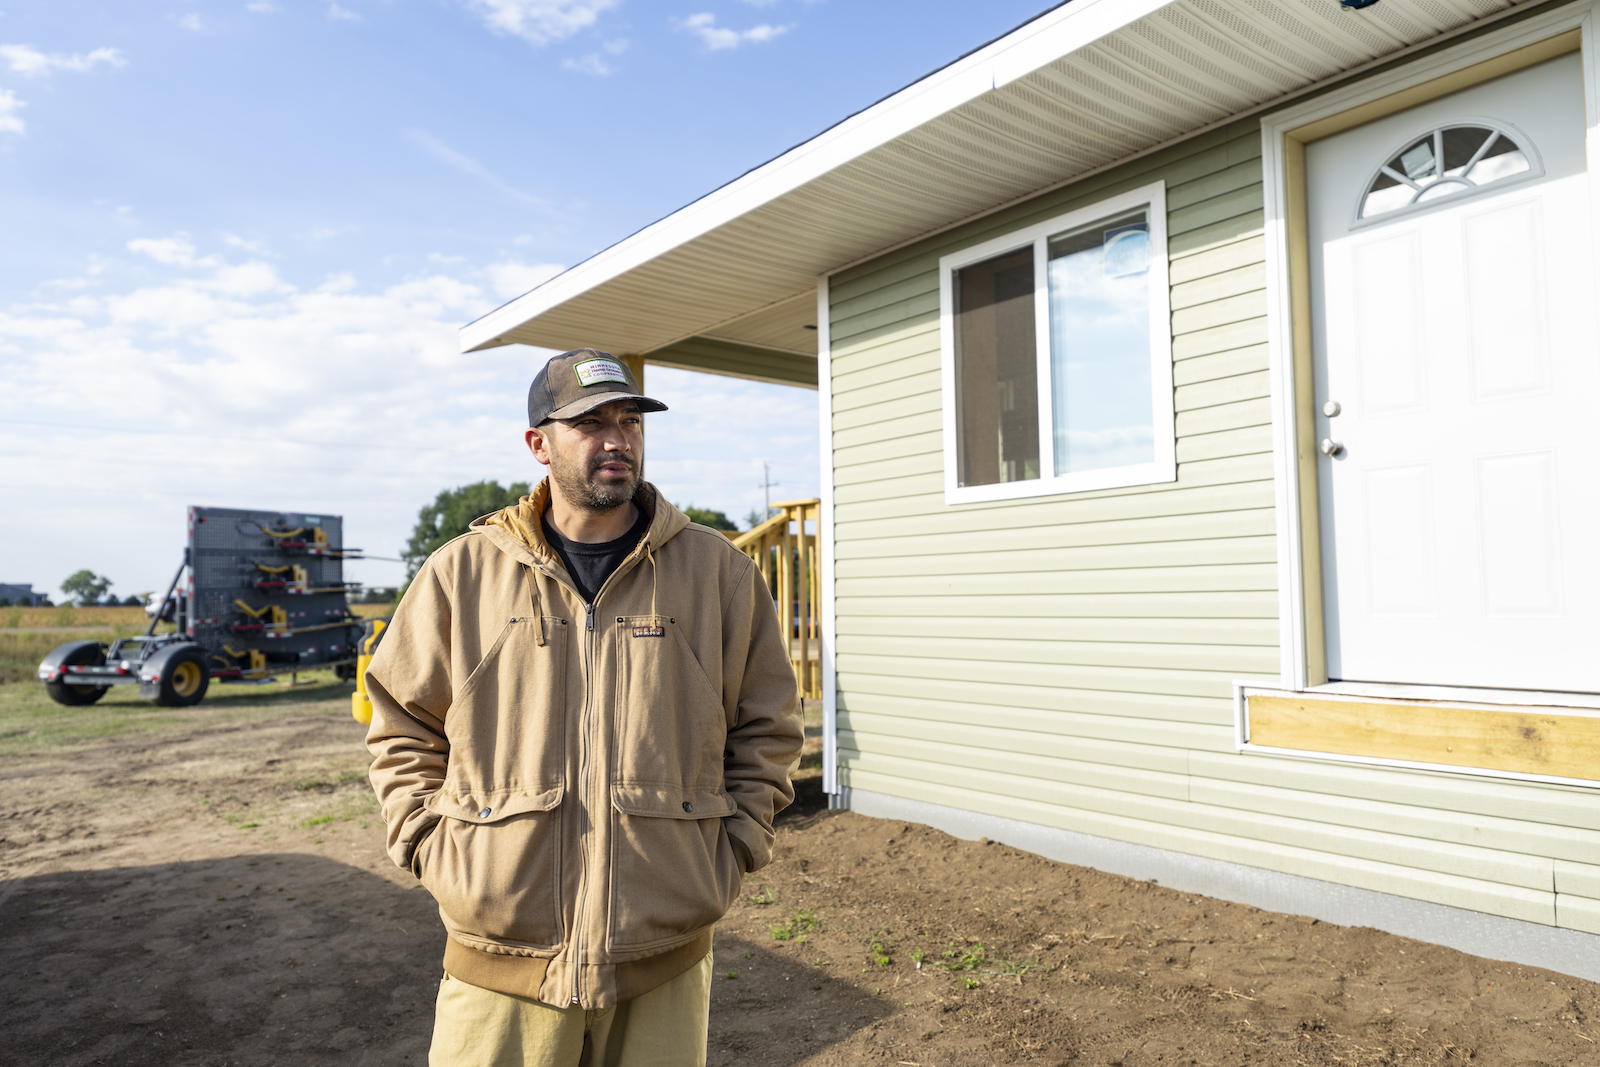 Danny Desjarlais, the project manager for the hempcrete effort, stands next to a newly built duplex made with the tribe's hempcrete.